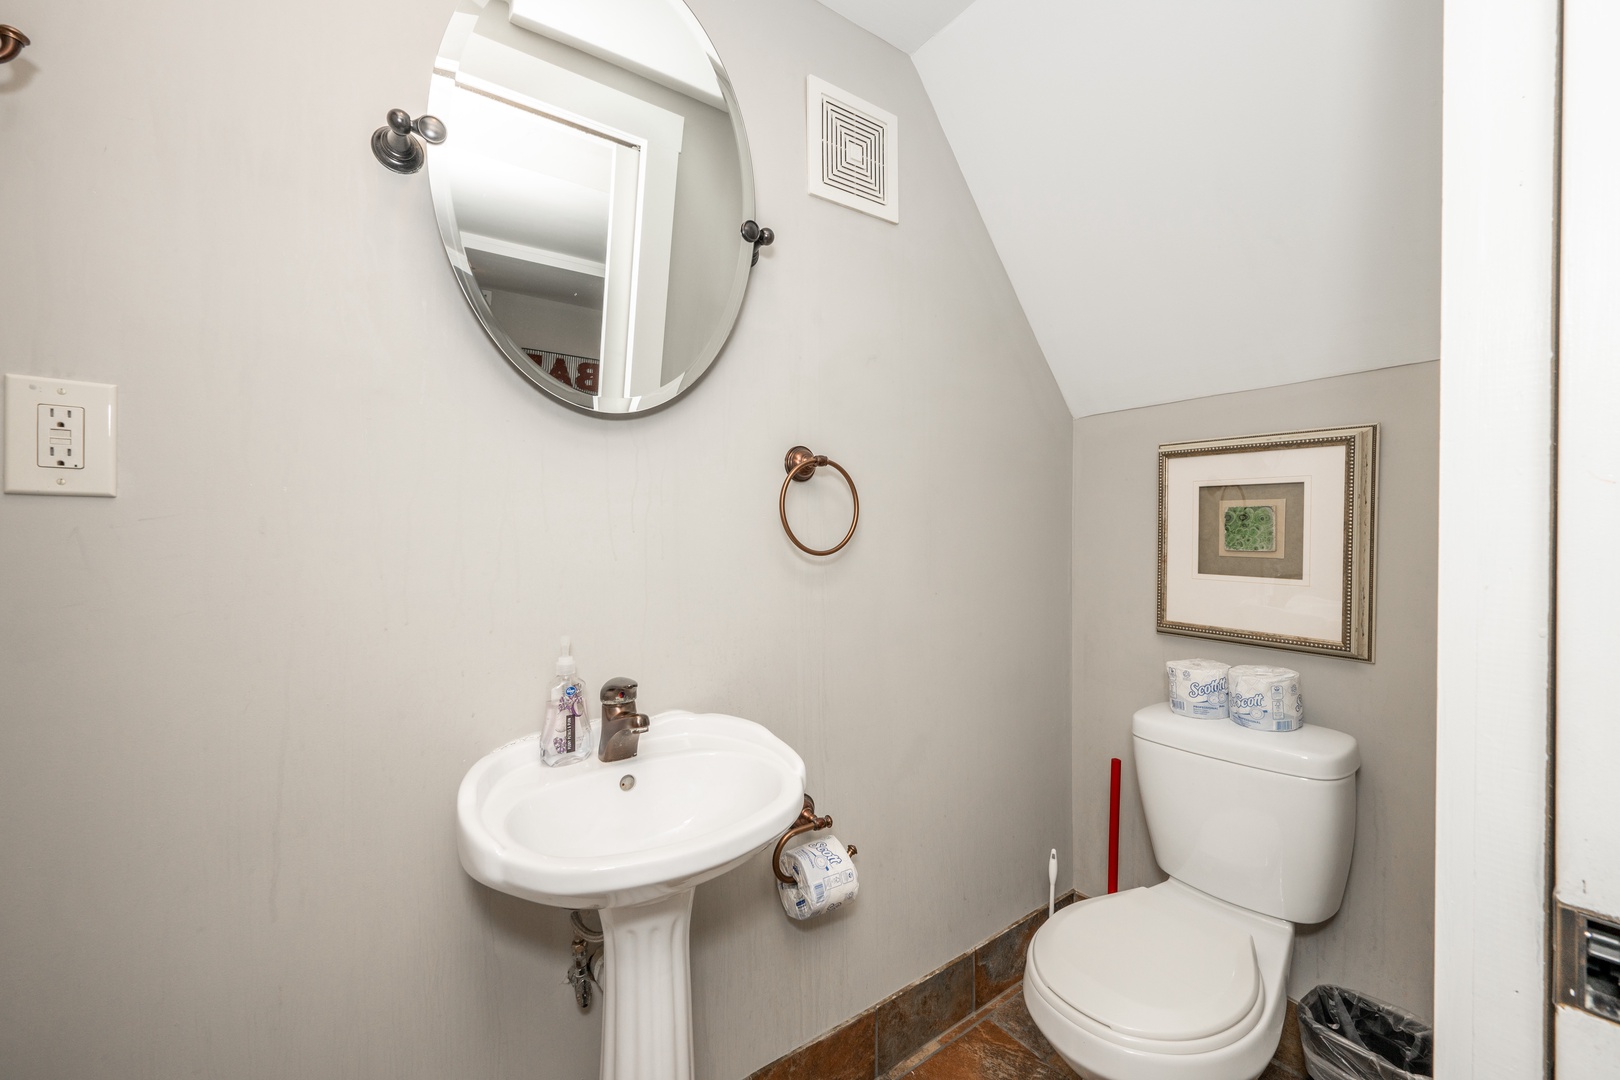 A full bath with a pedestal sink & shower is available on the lower level